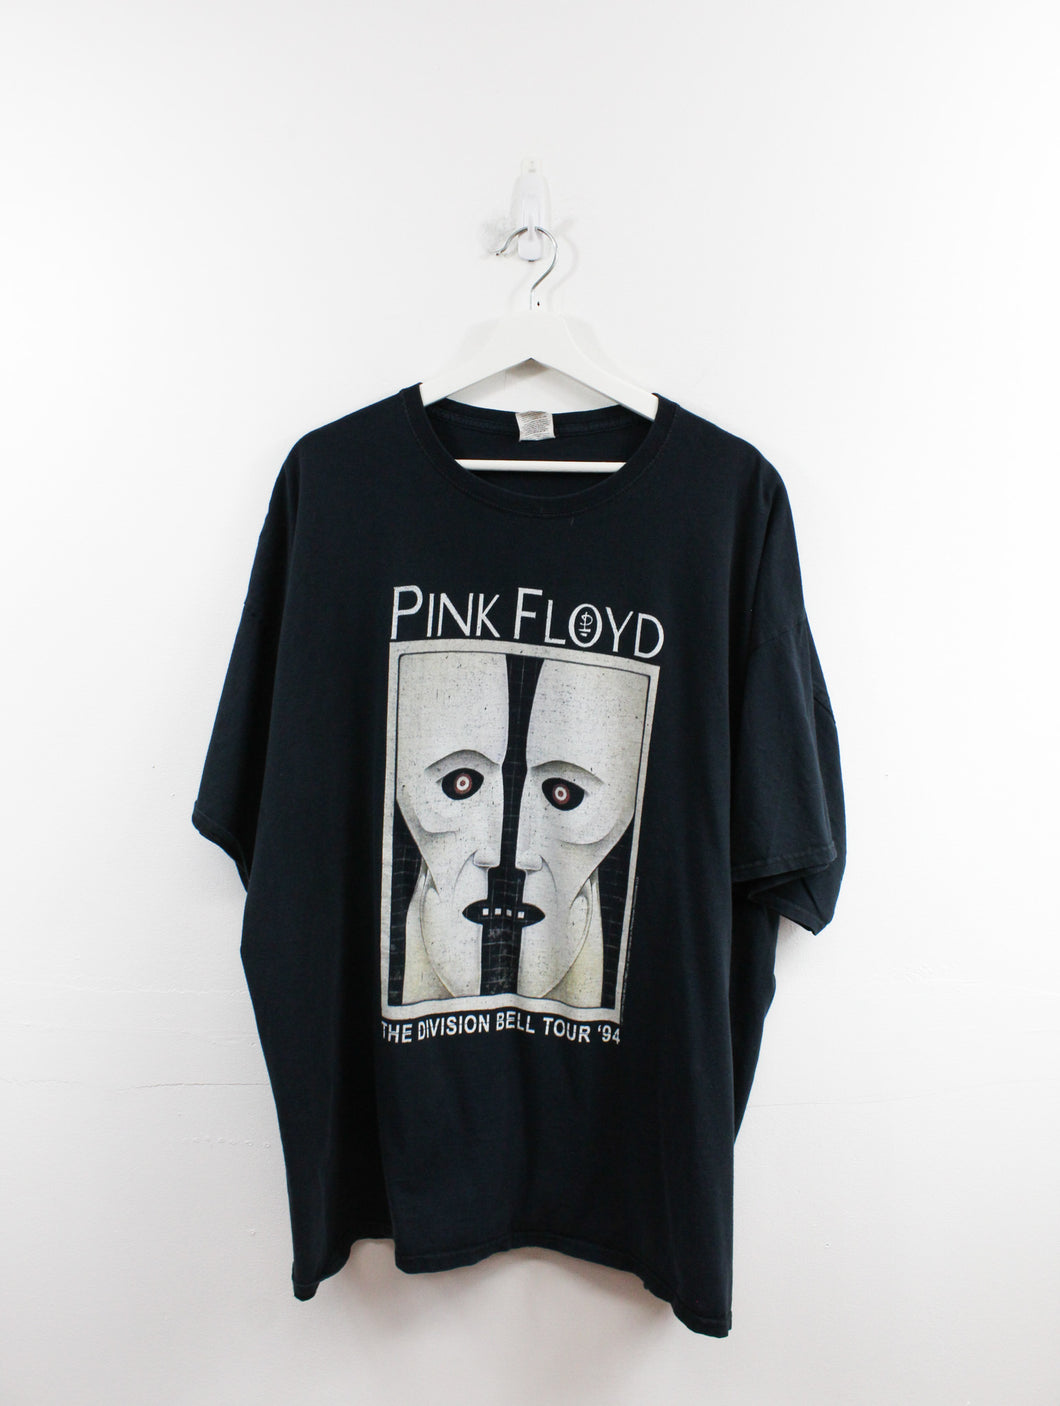 2017 Pink Floyd The Division Bell Tour Reprint Tee